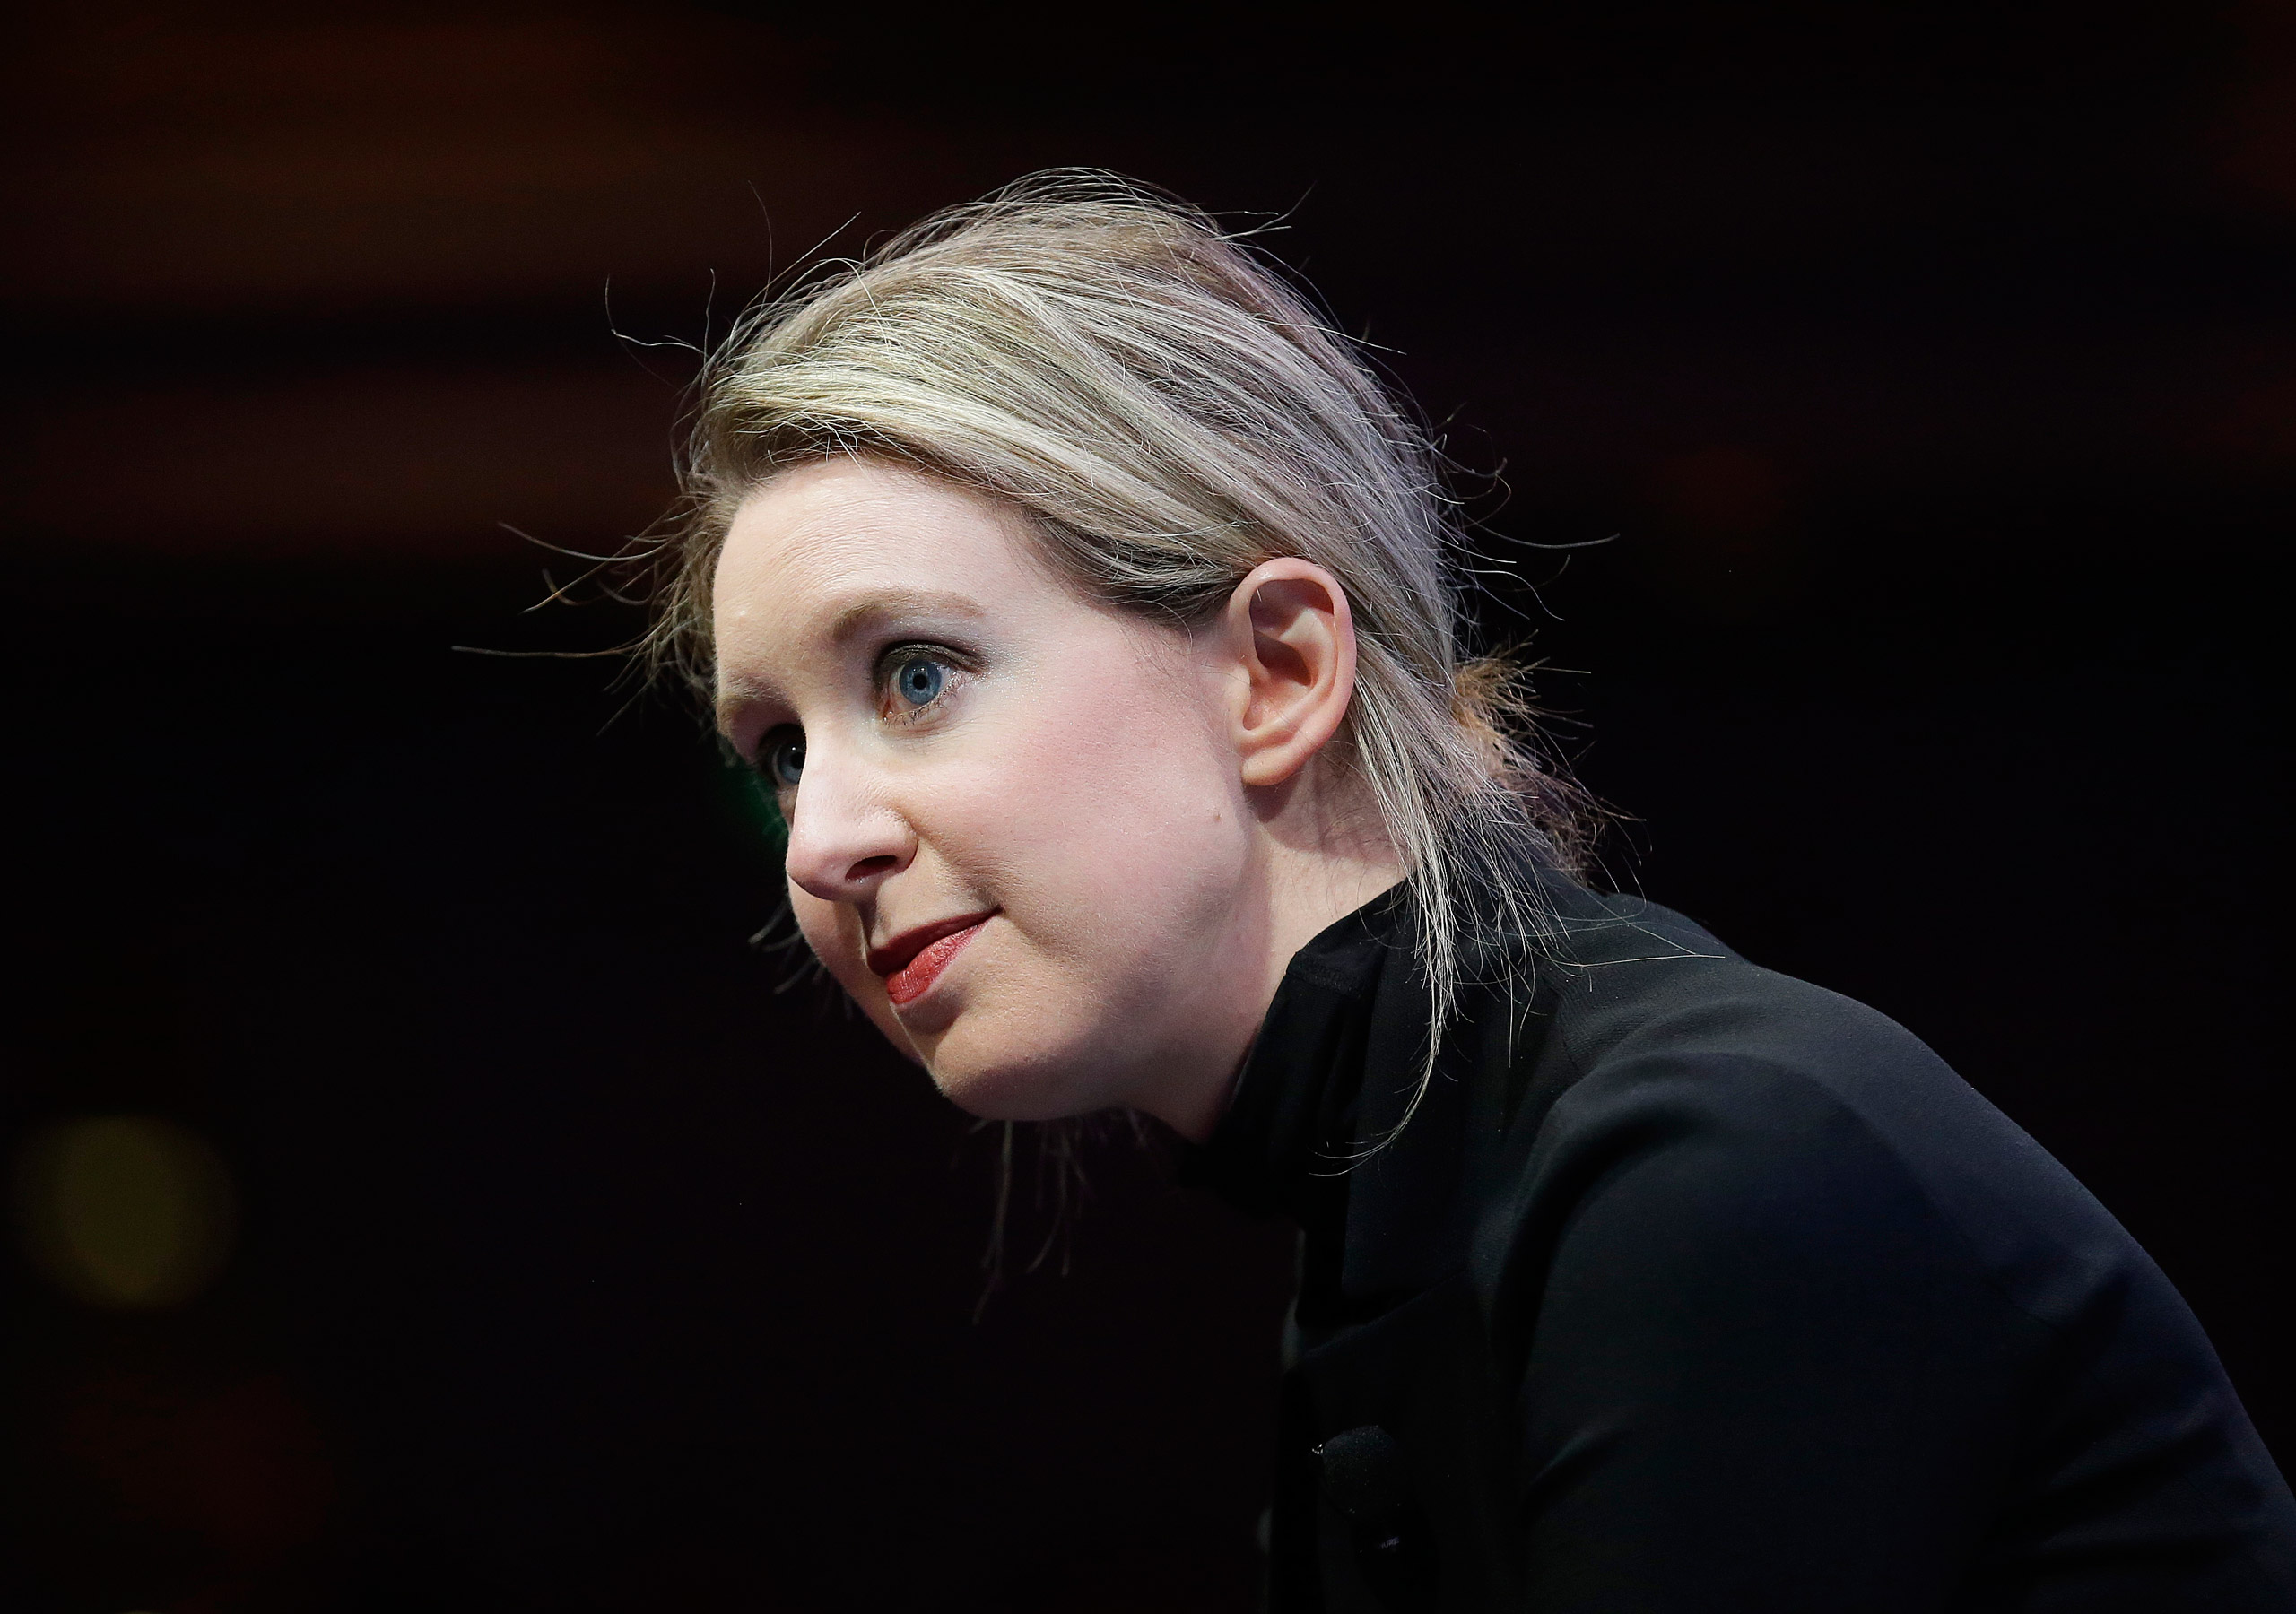 Elizabeth Holmes, founder and CEO of Theranos, speaks at the Fortune Global Forum in San Francisco on Nov. 2, 2015. (Jeff Chiu—AP)